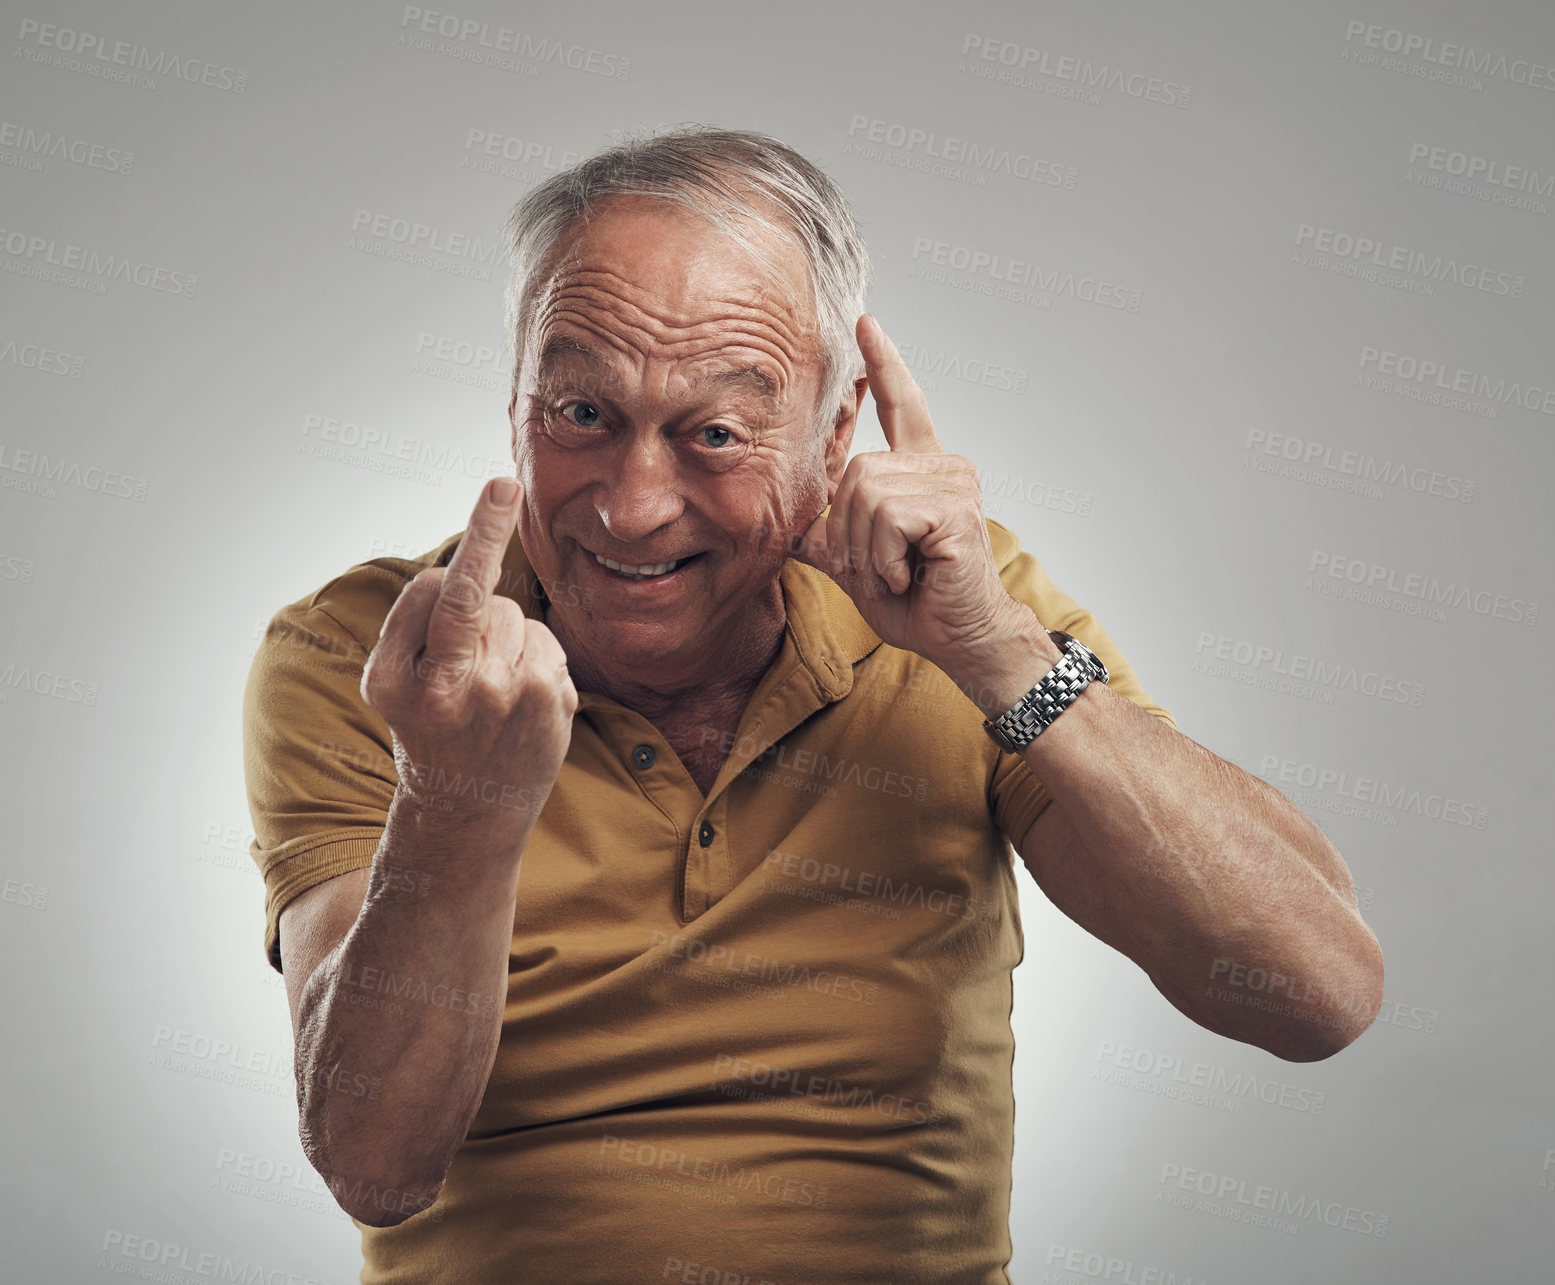 Buy stock photo Studio shot of an elderly man showing his middle finger against a grey background